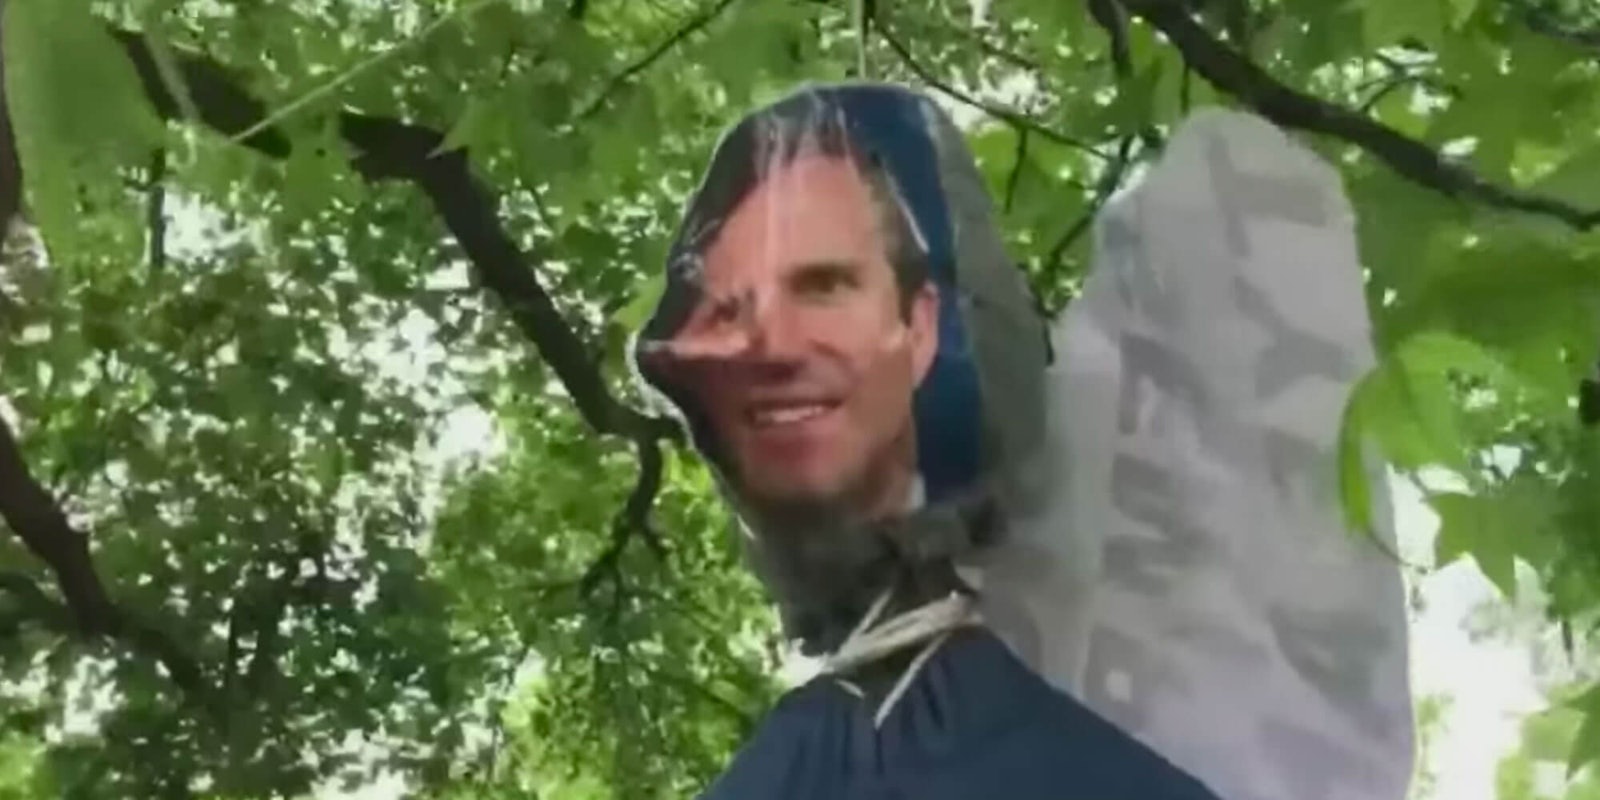 Screenshot of head of kentucky governor hanged from a tree